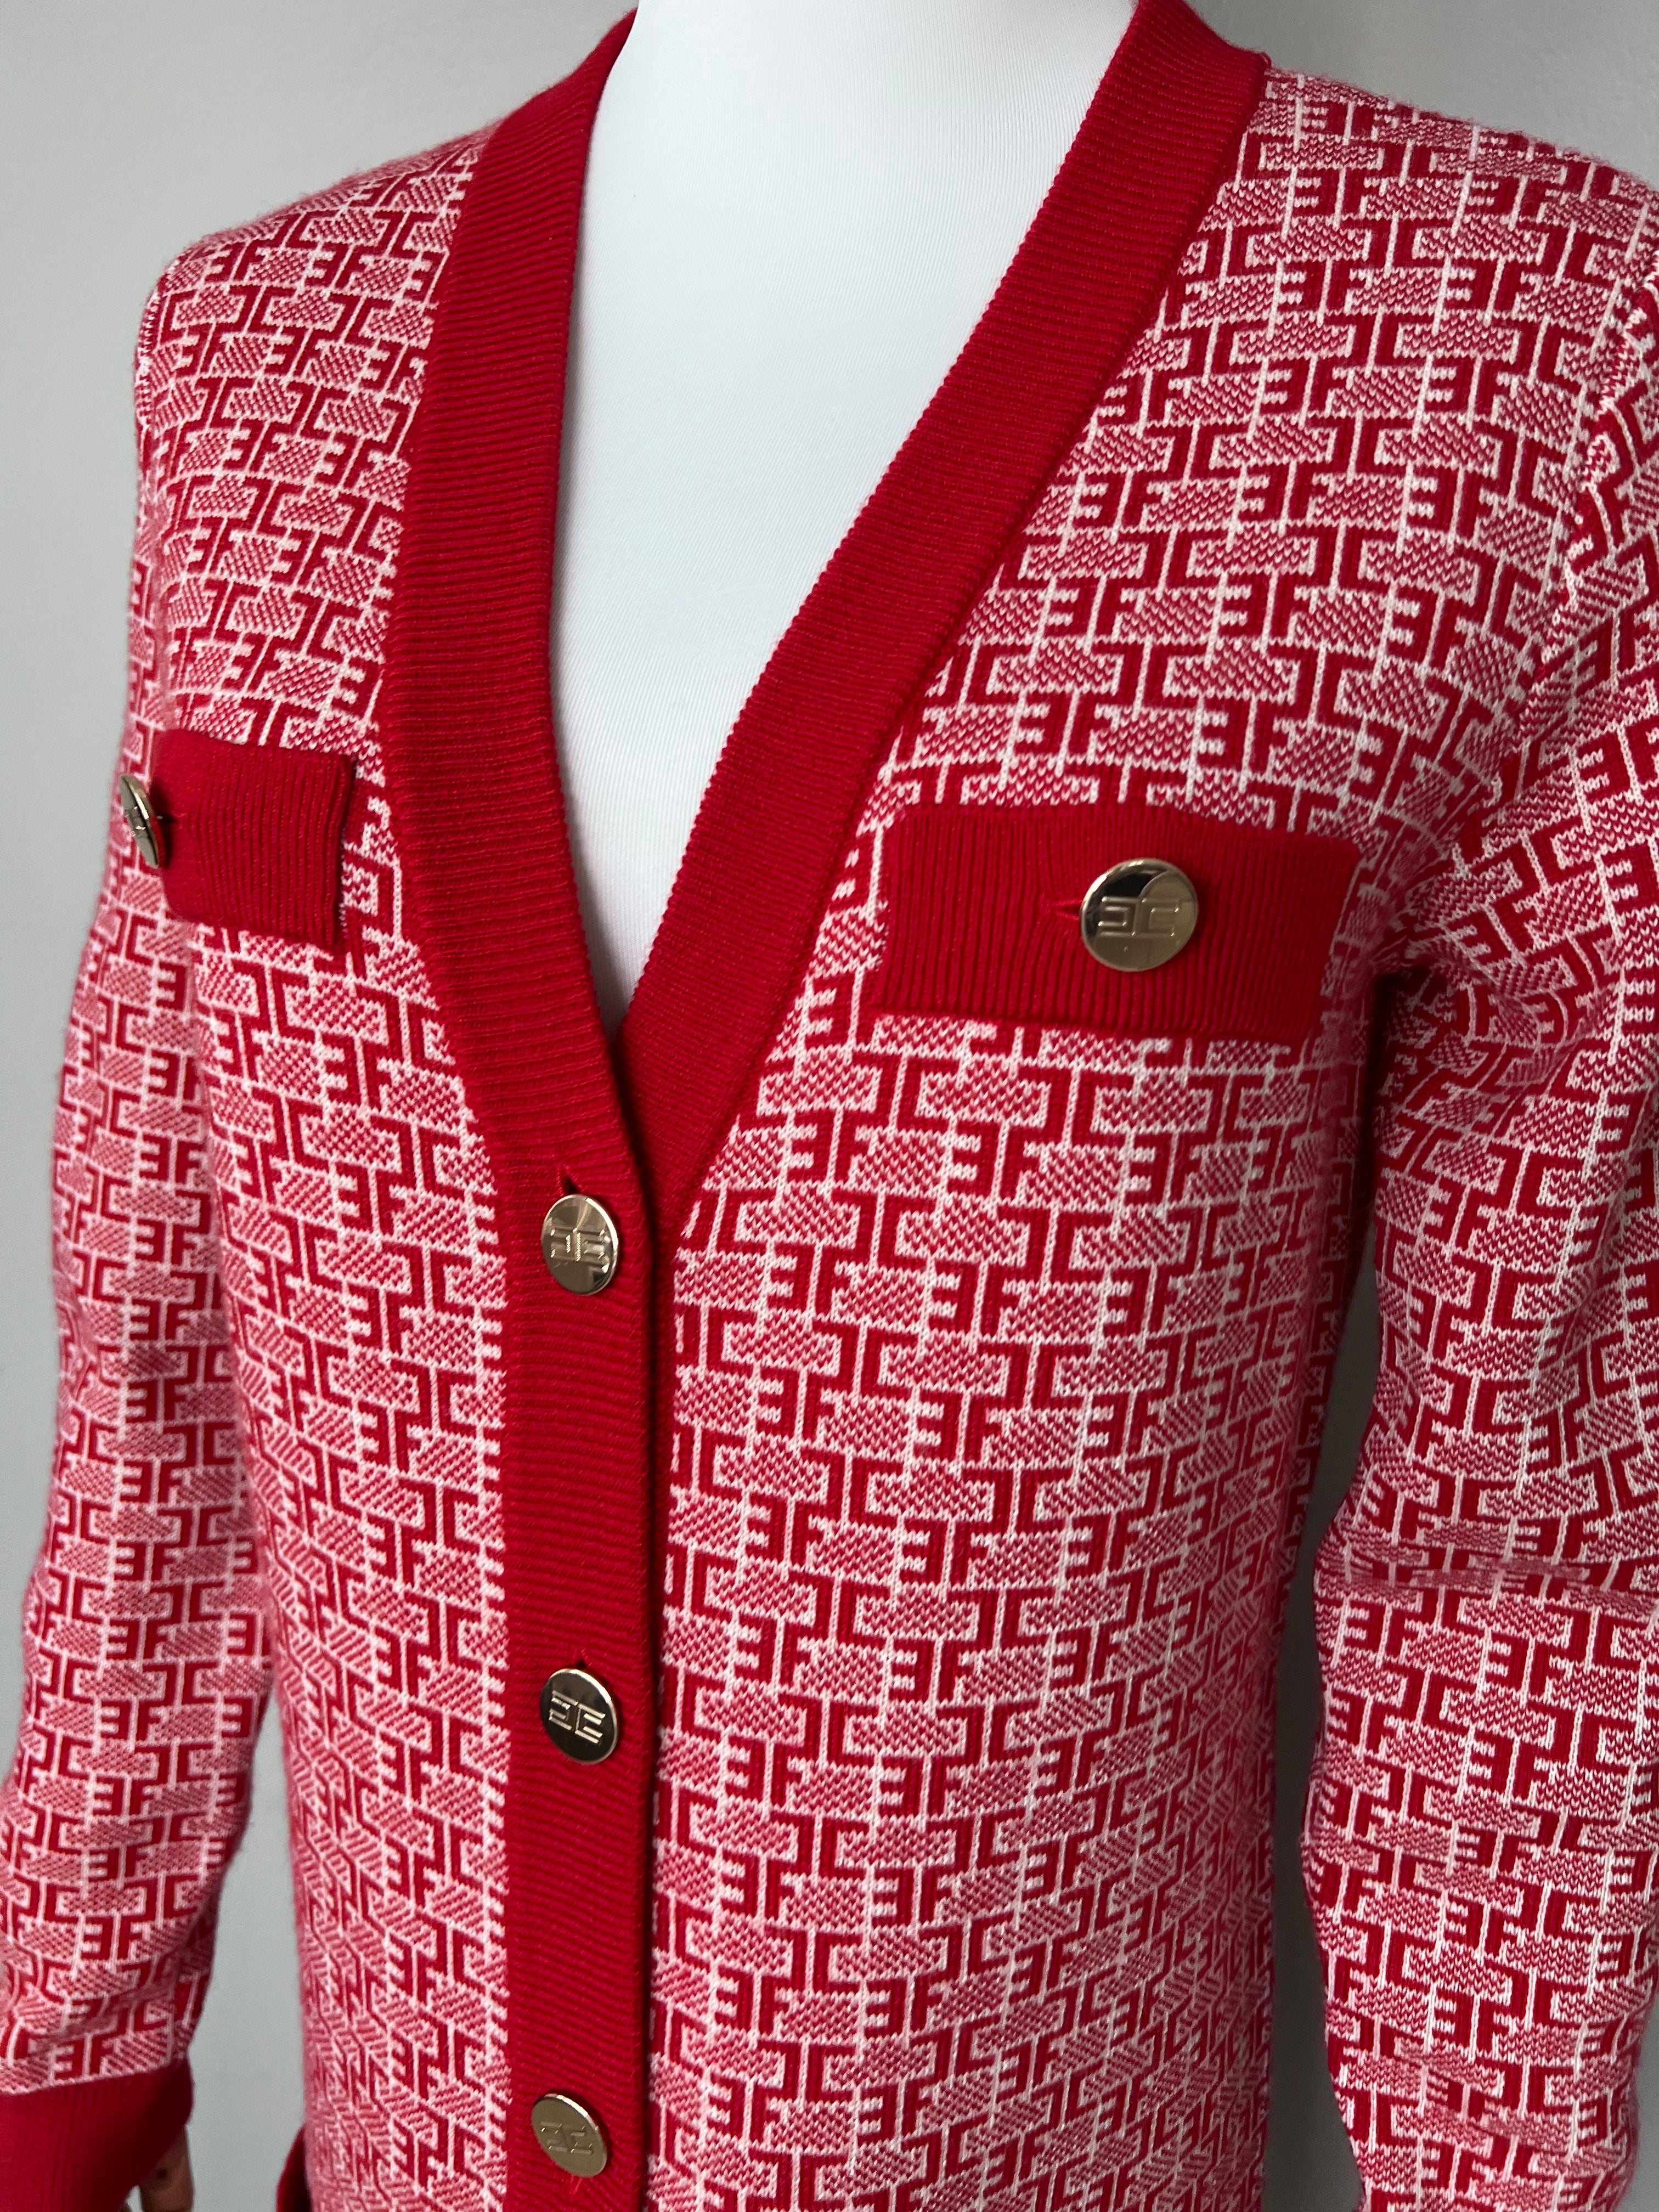 Red & white knitted long cardigan with gold buttons - ELISABETTA FRANCHI